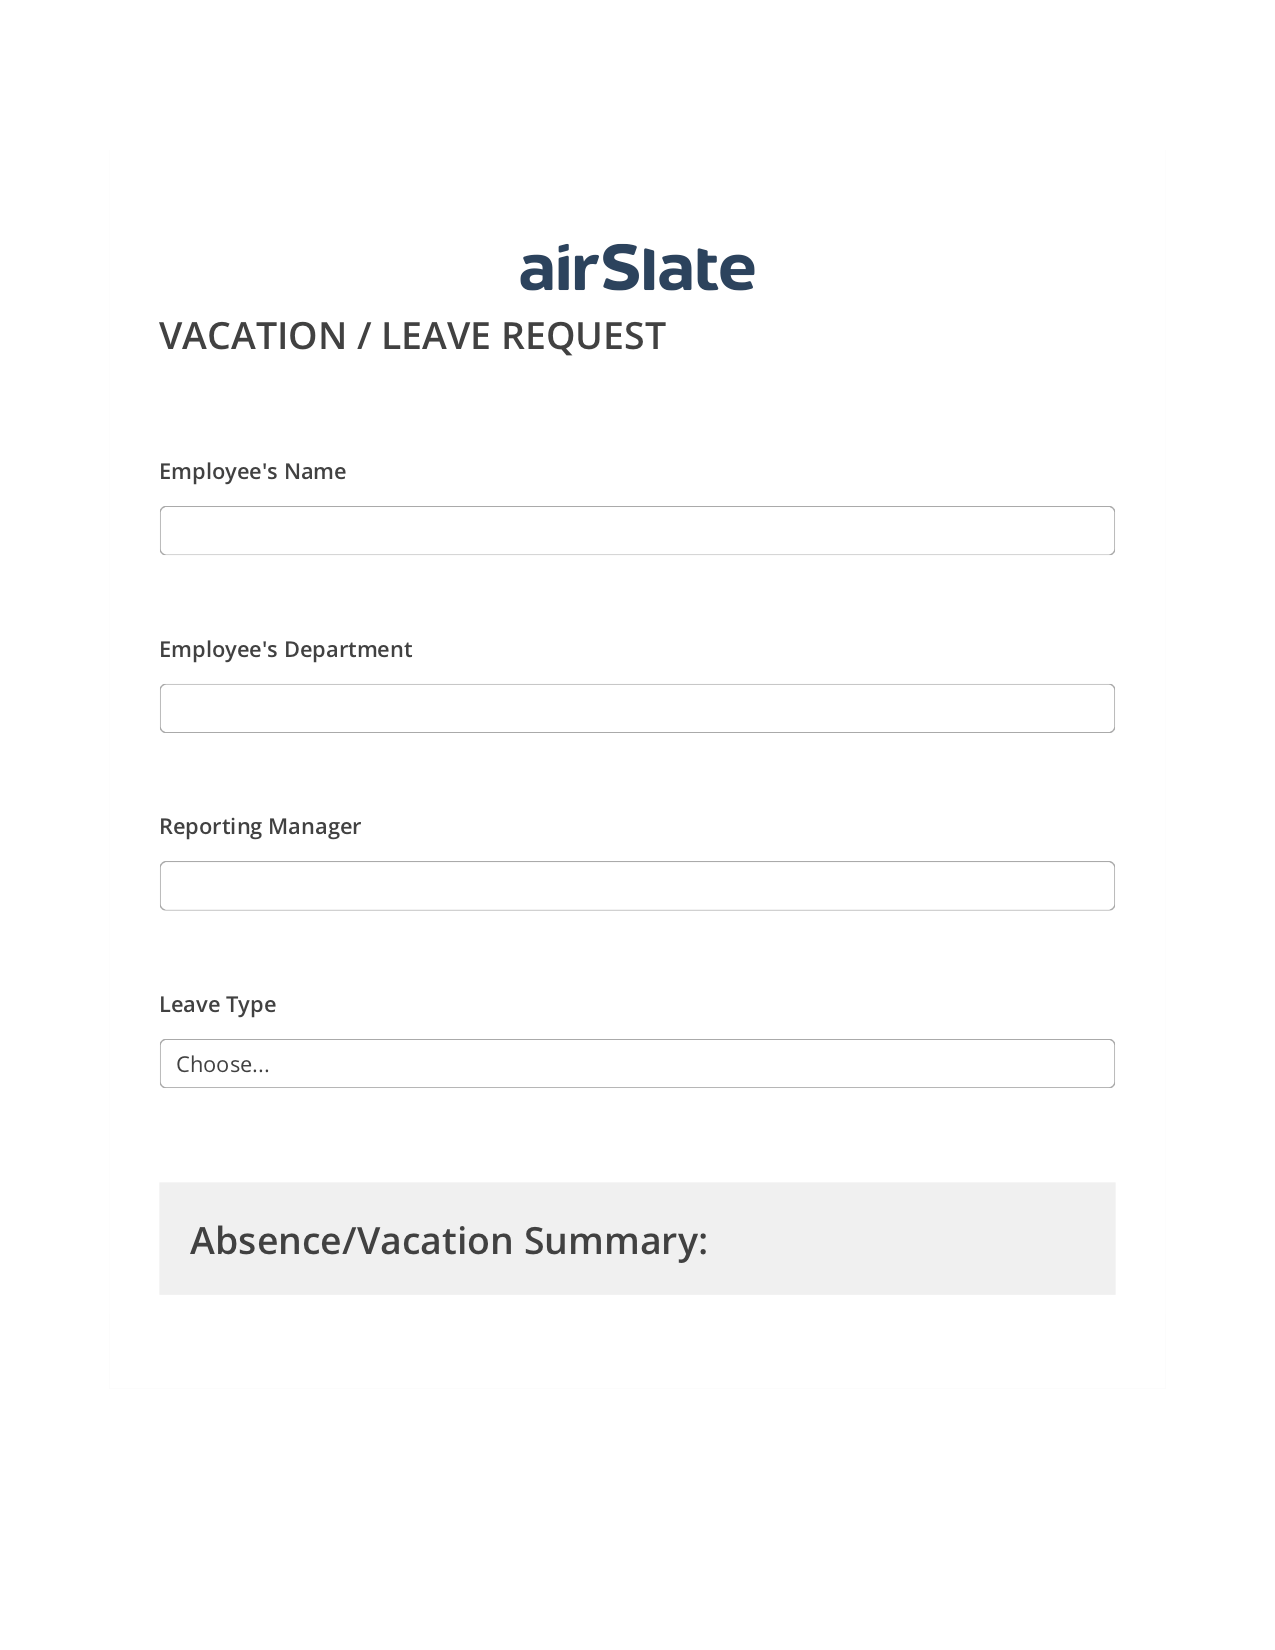 Multirole Vacation/Leave Request Workflow Pre-fill from MS Dynamics 365 Records, Slack Notification Bot, Export to Smartsheet